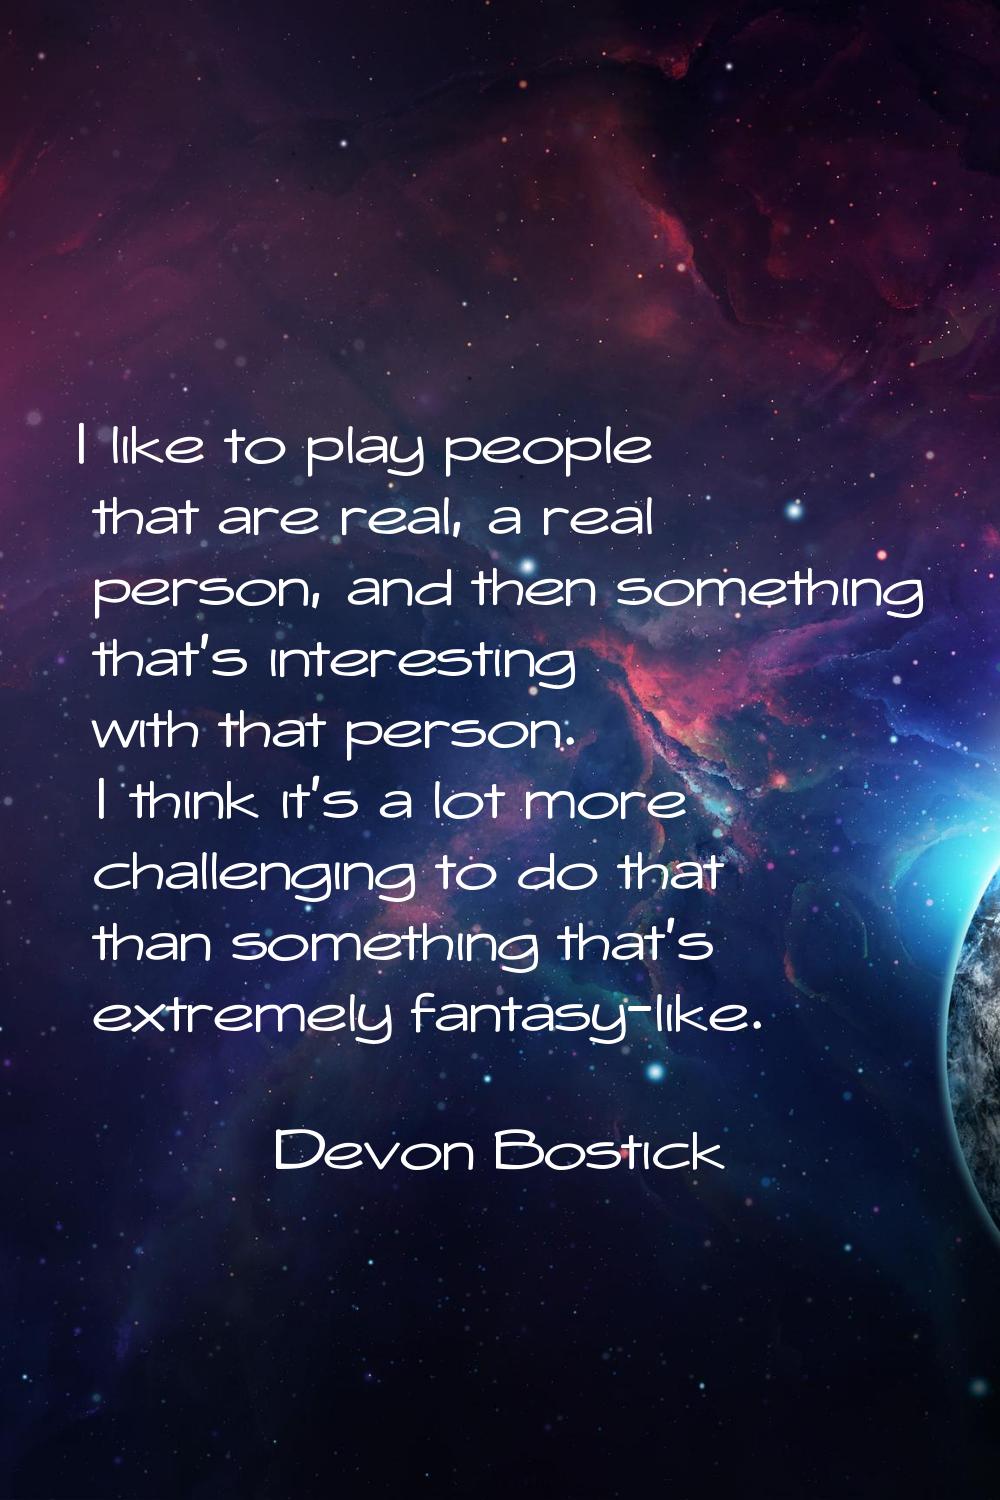 I like to play people that are real, a real person, and then something that's interesting with that